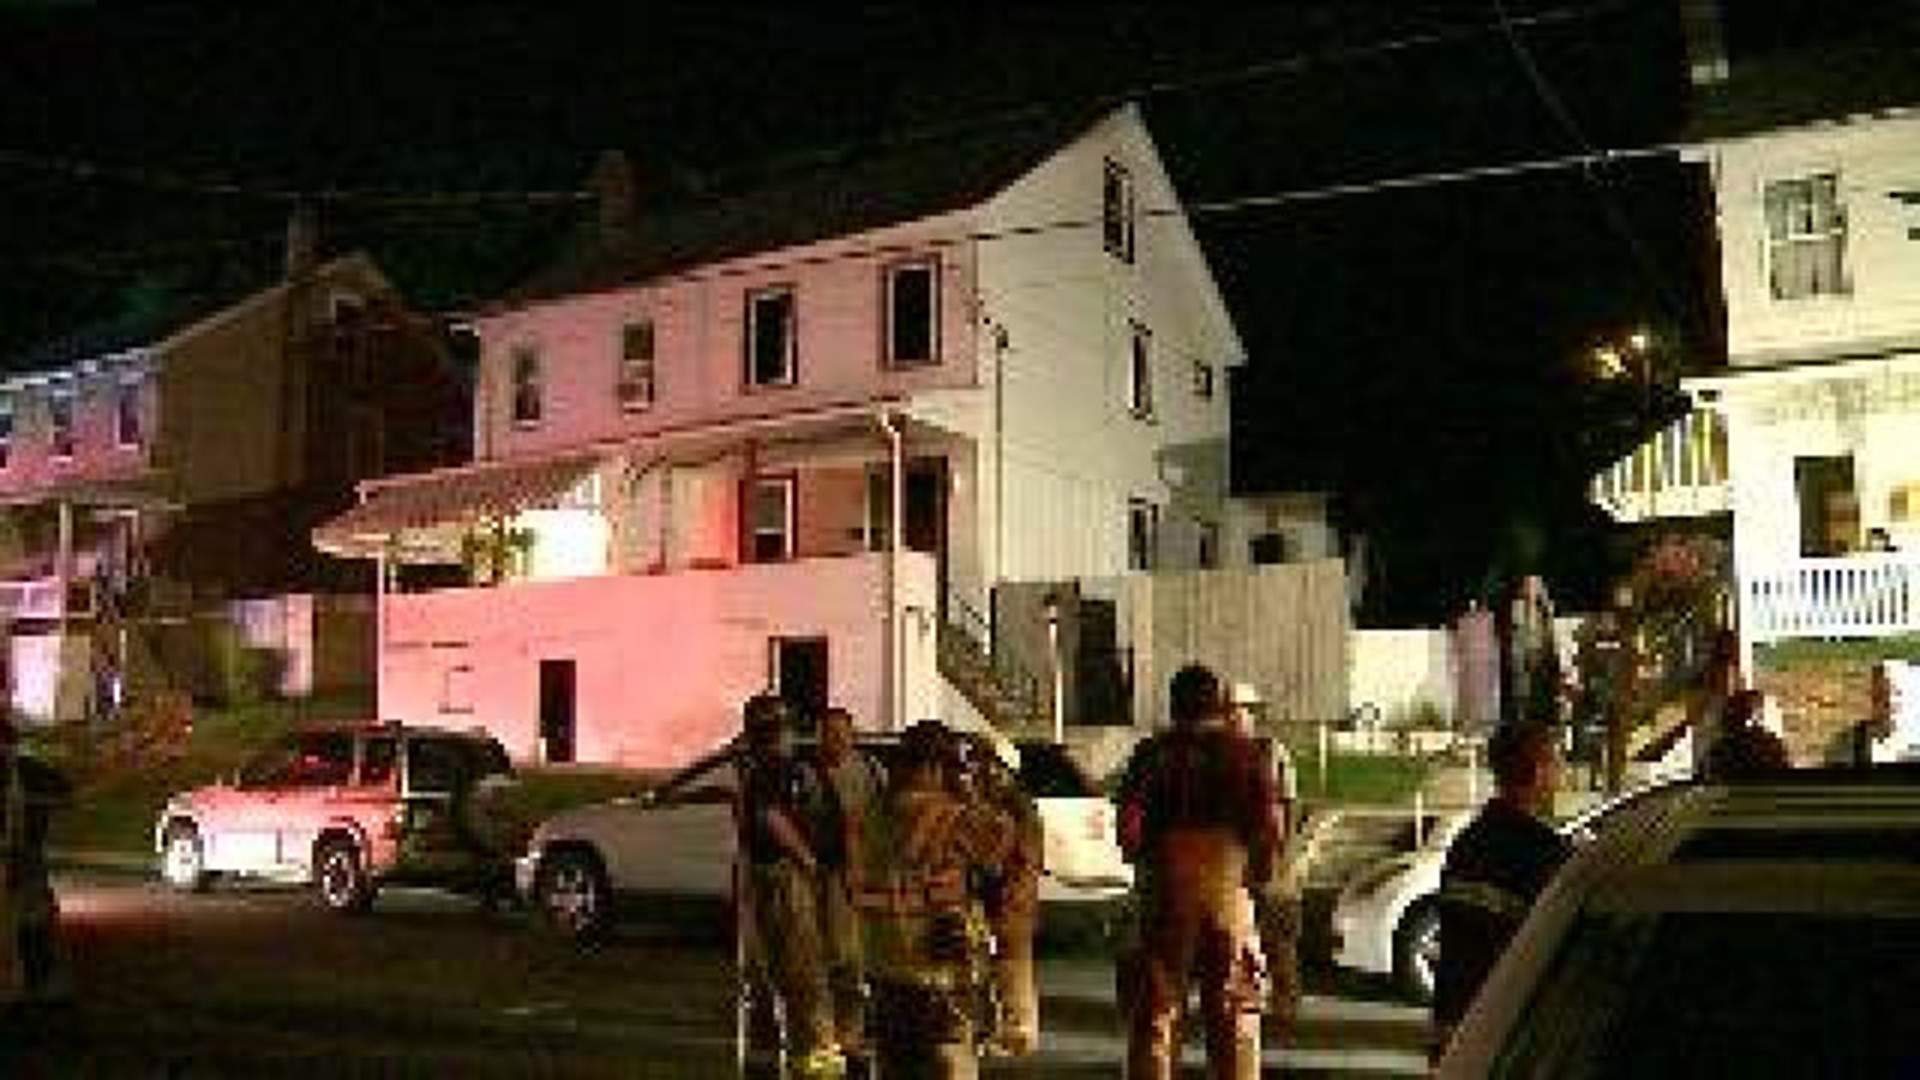 Man Sent to Hospital After Flames Hit Double Block Home